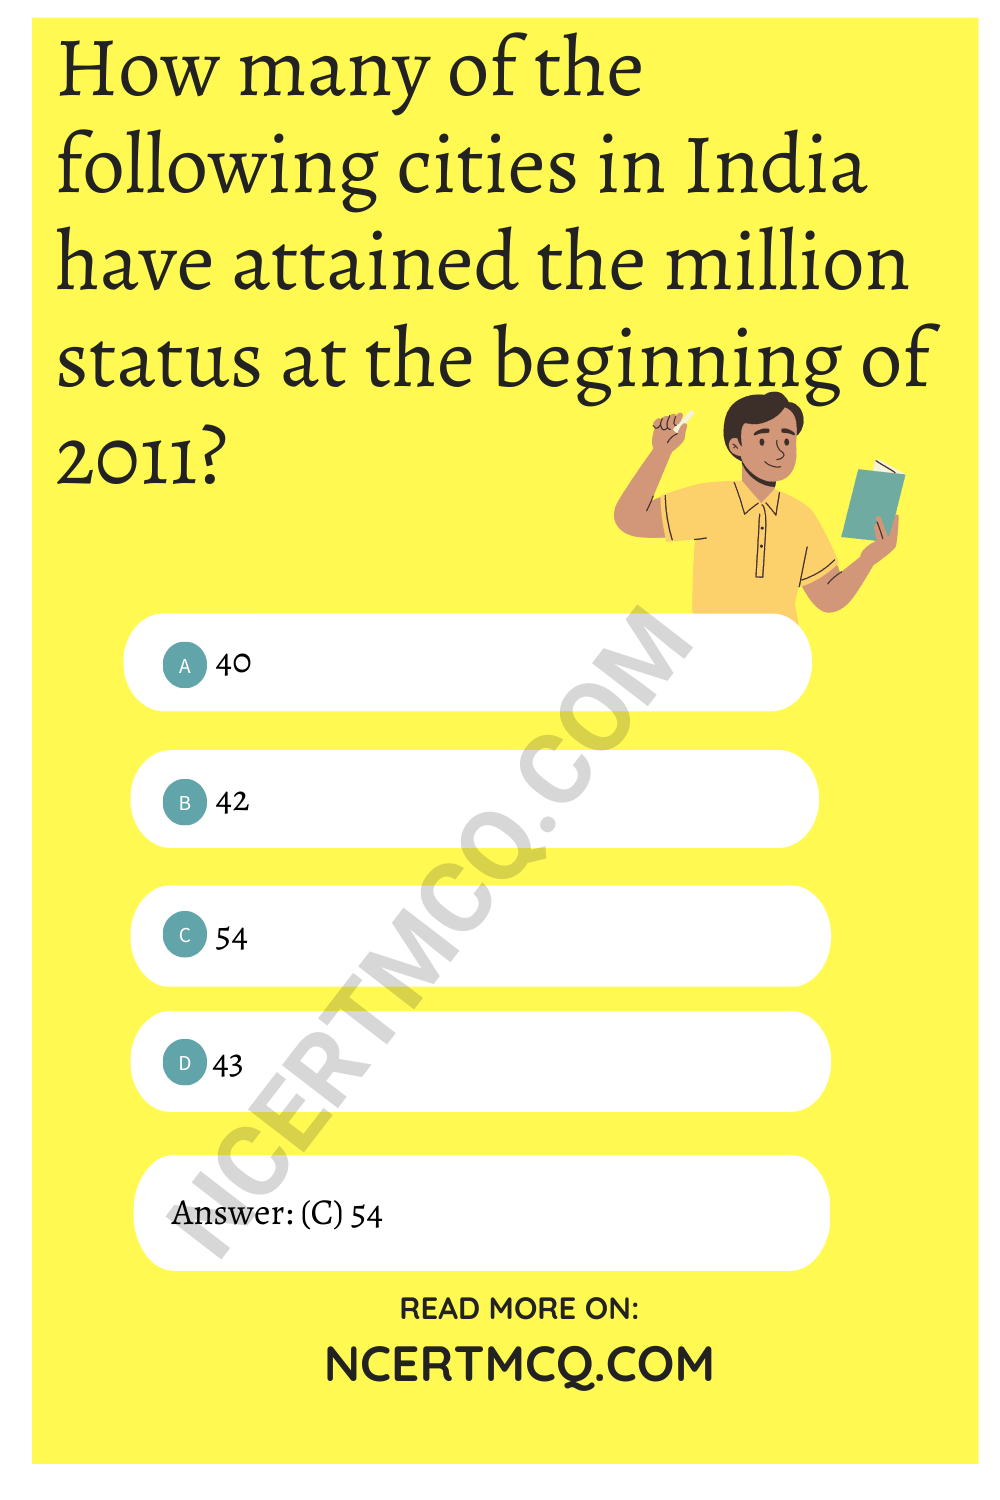 How many of the following cities in India have attained the million status at the beginning of 2011?